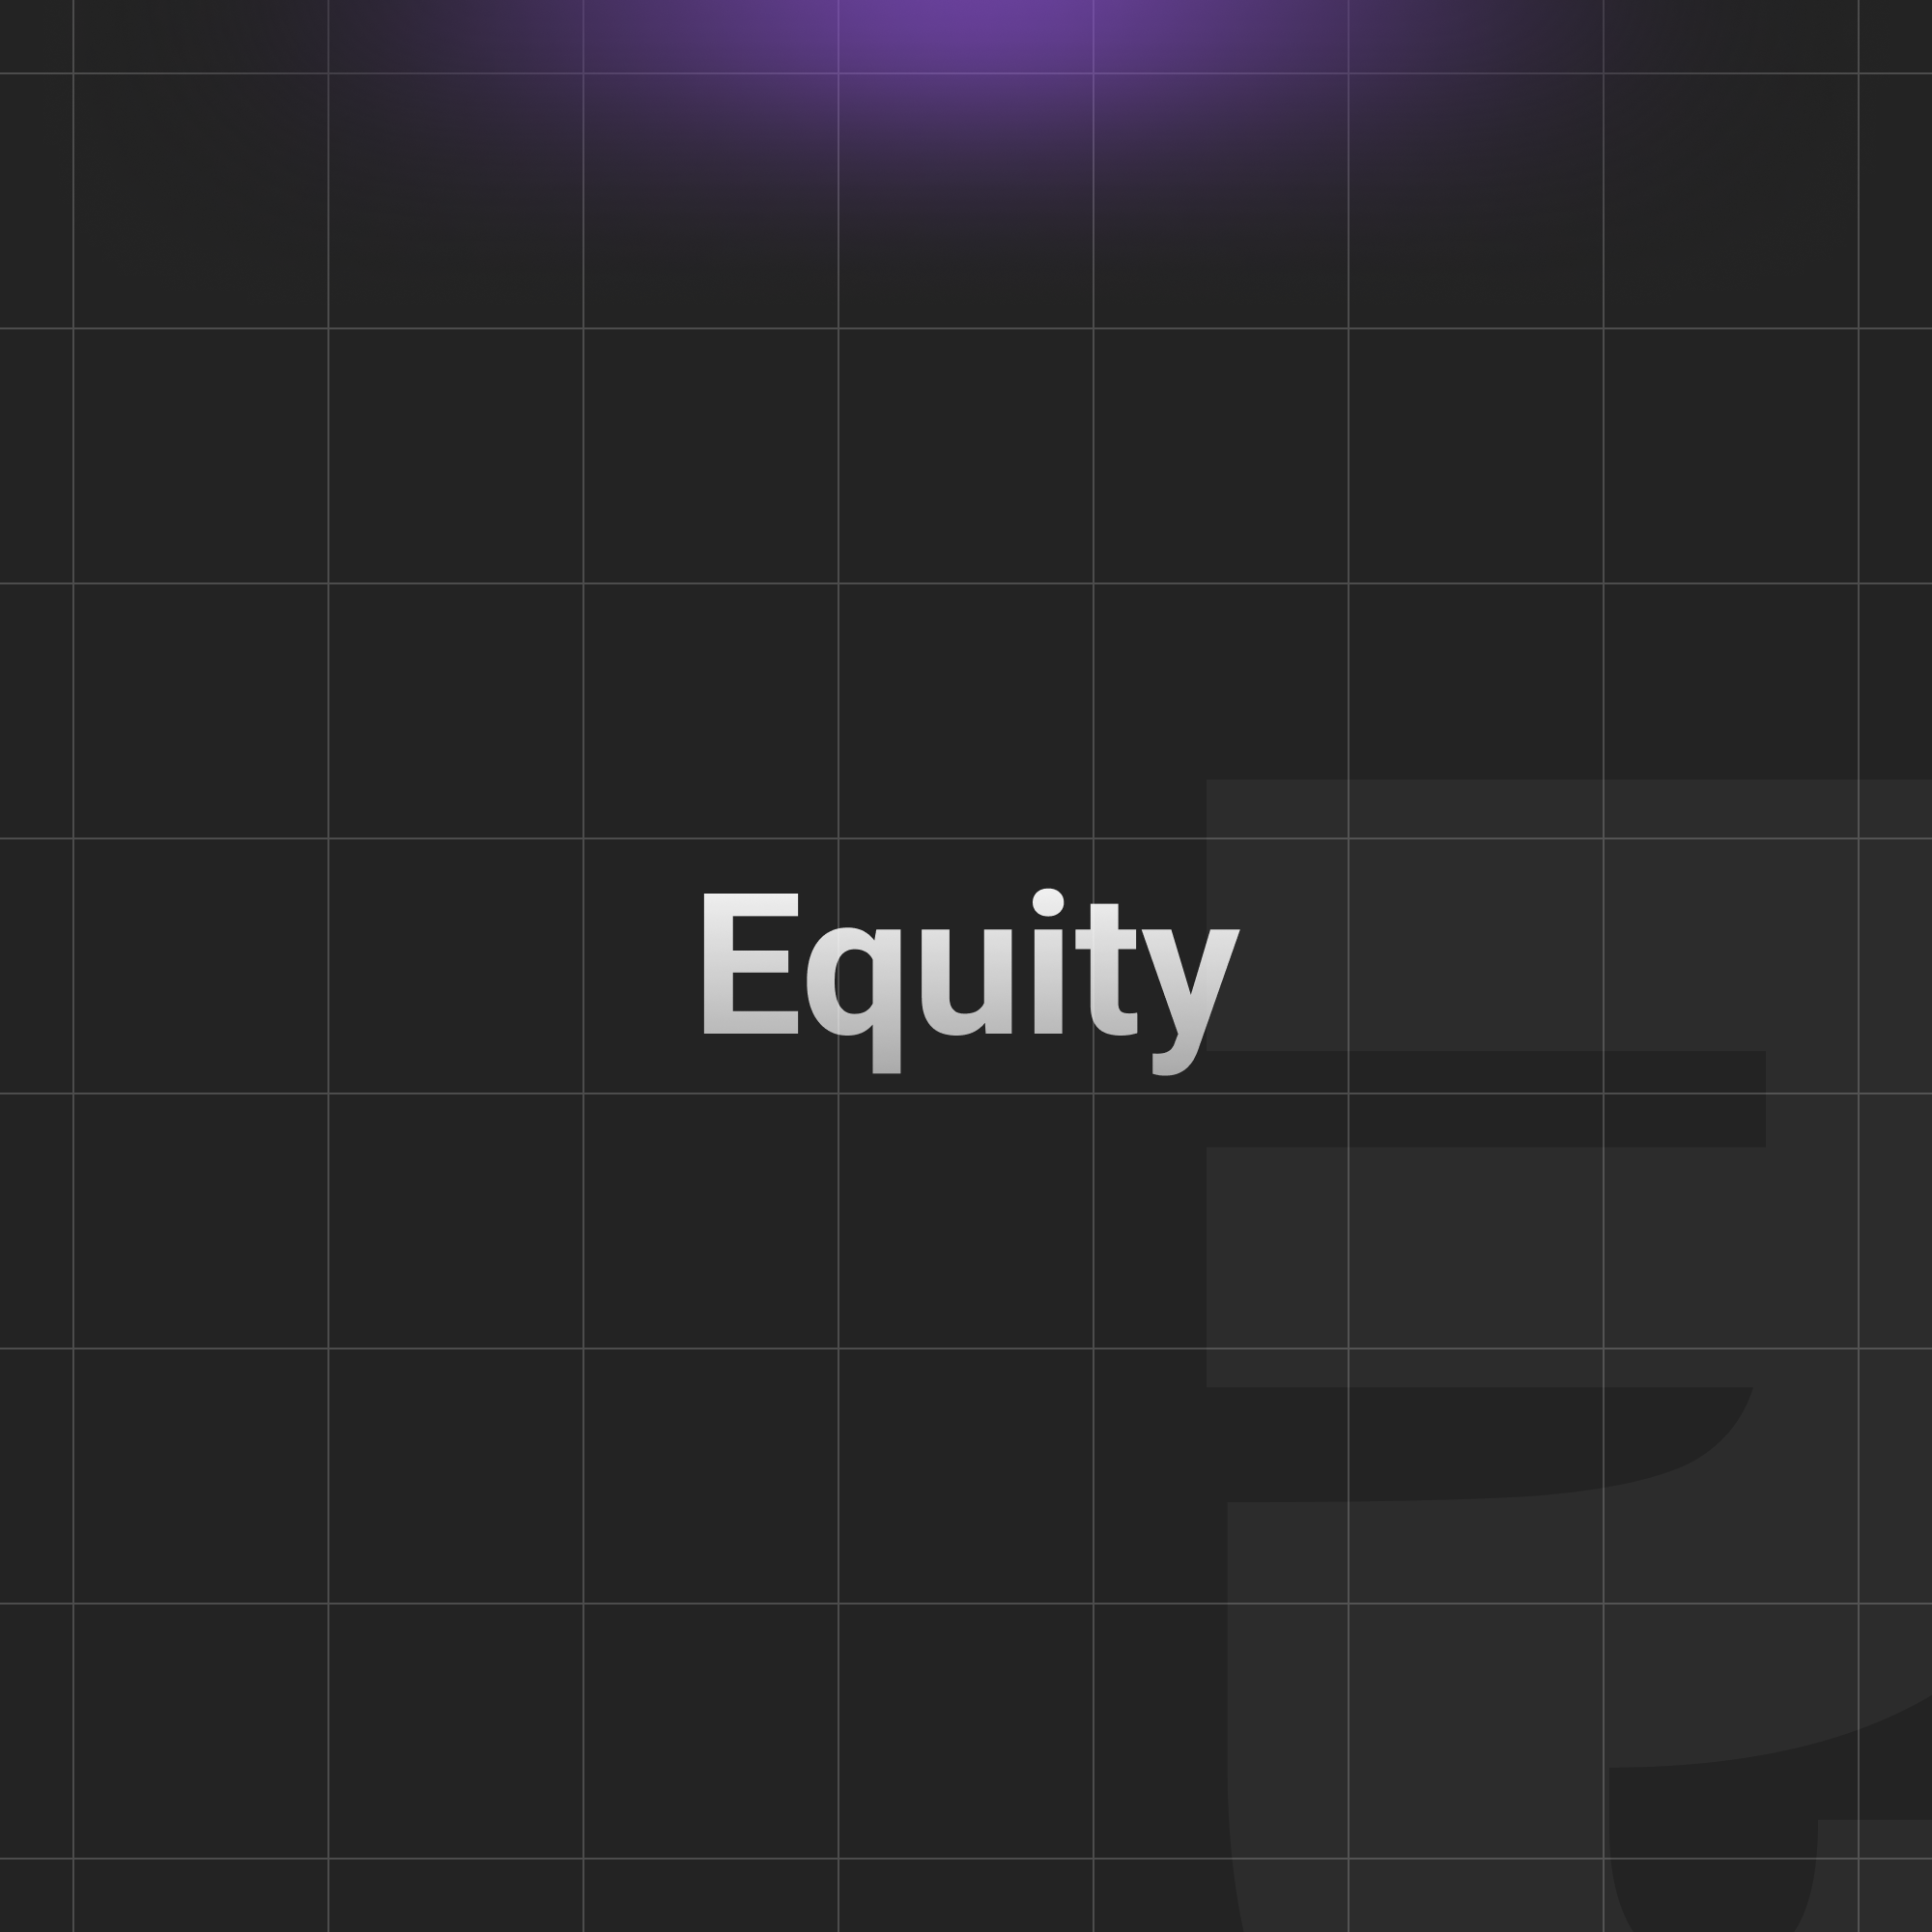 What is Equity and what is Equity investment?